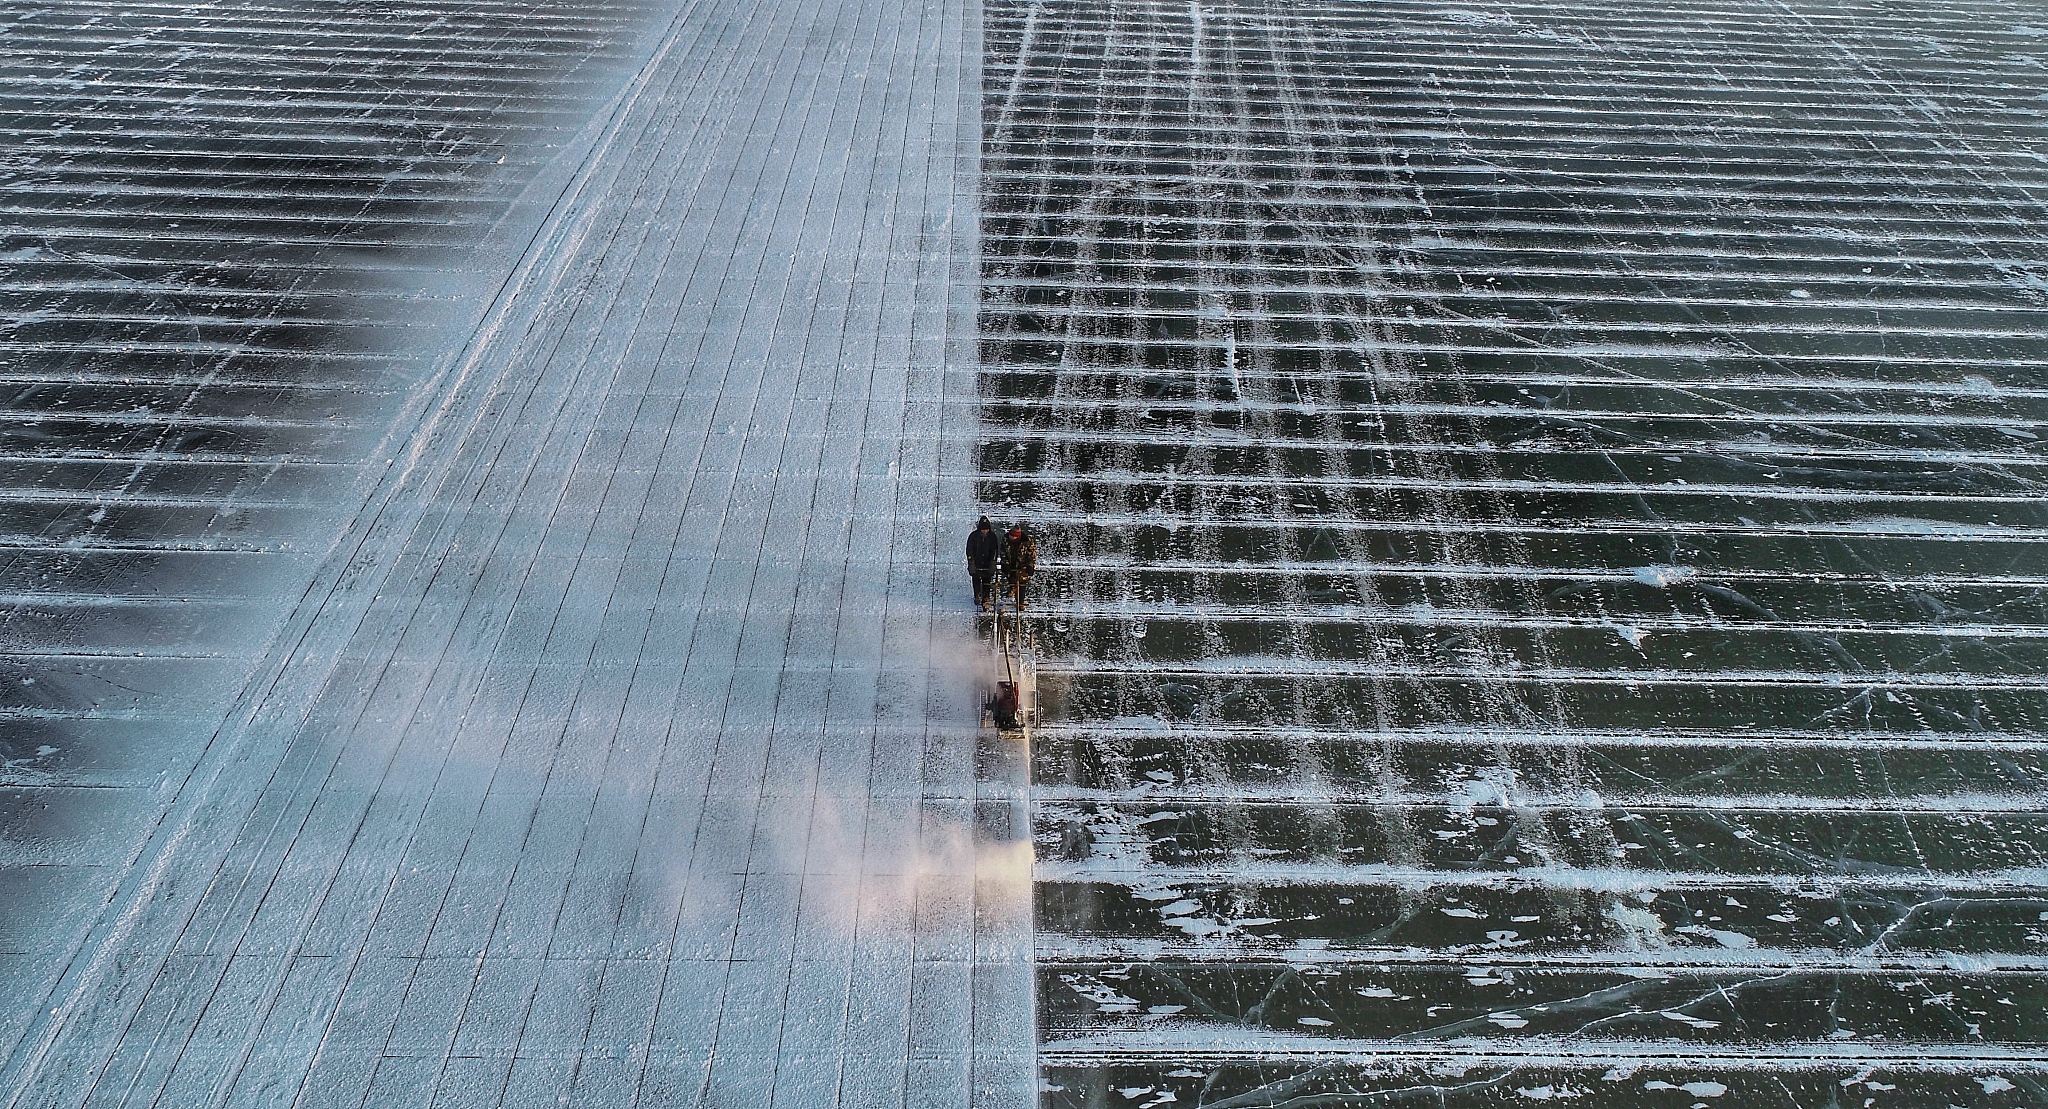 Ice pickers divide the ice rows and move the separated ice bricks forward. /CFP